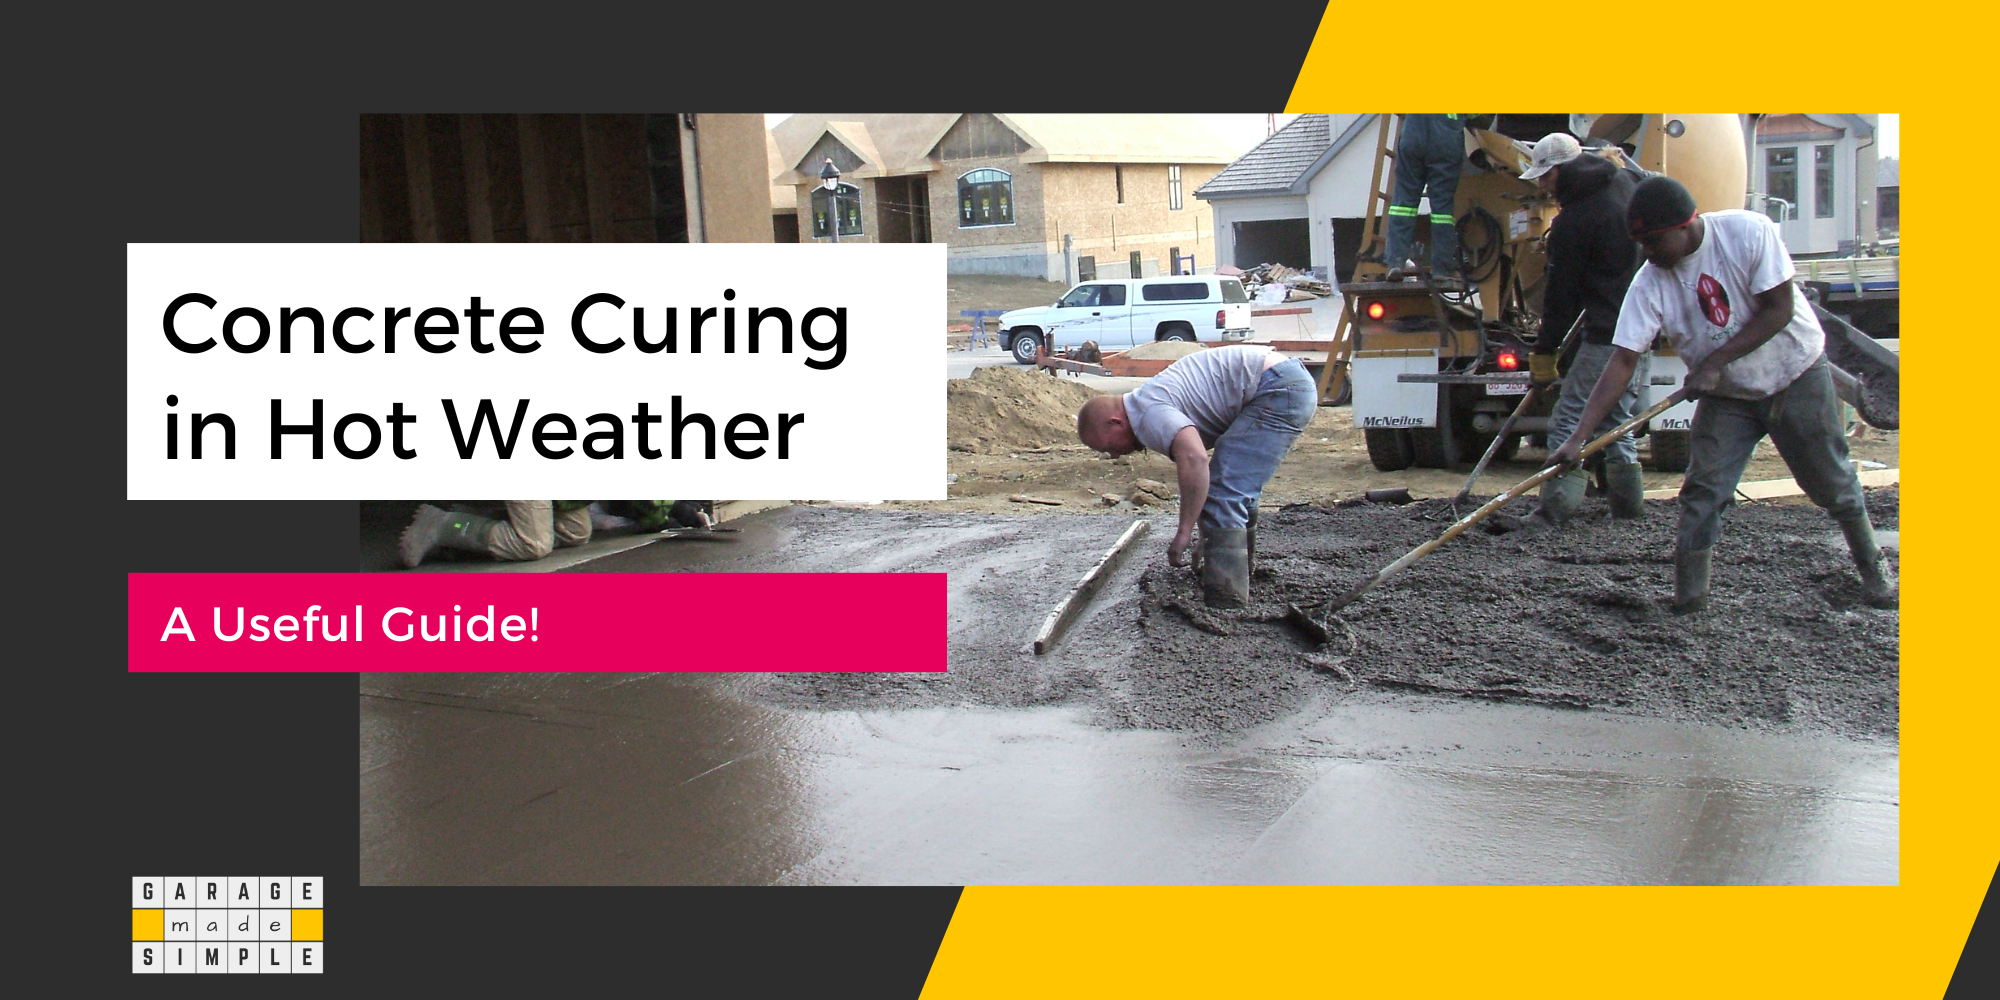 Curing Concrete in Hot Weather